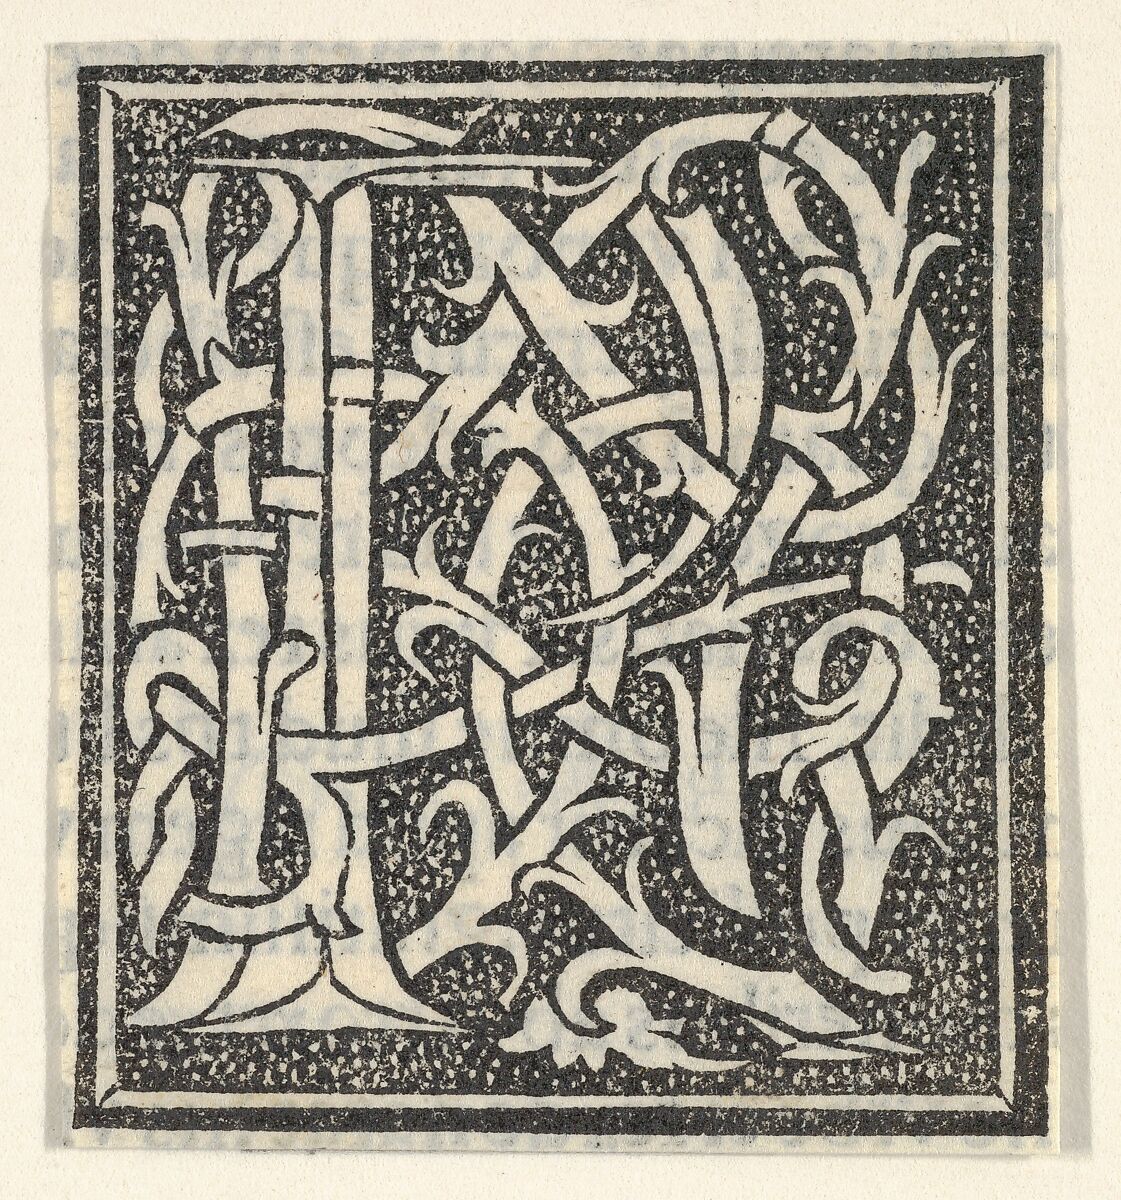 Initial letter P on patterned background, Anonymous, Italian, 16th century, Woodcut, criblé ground 